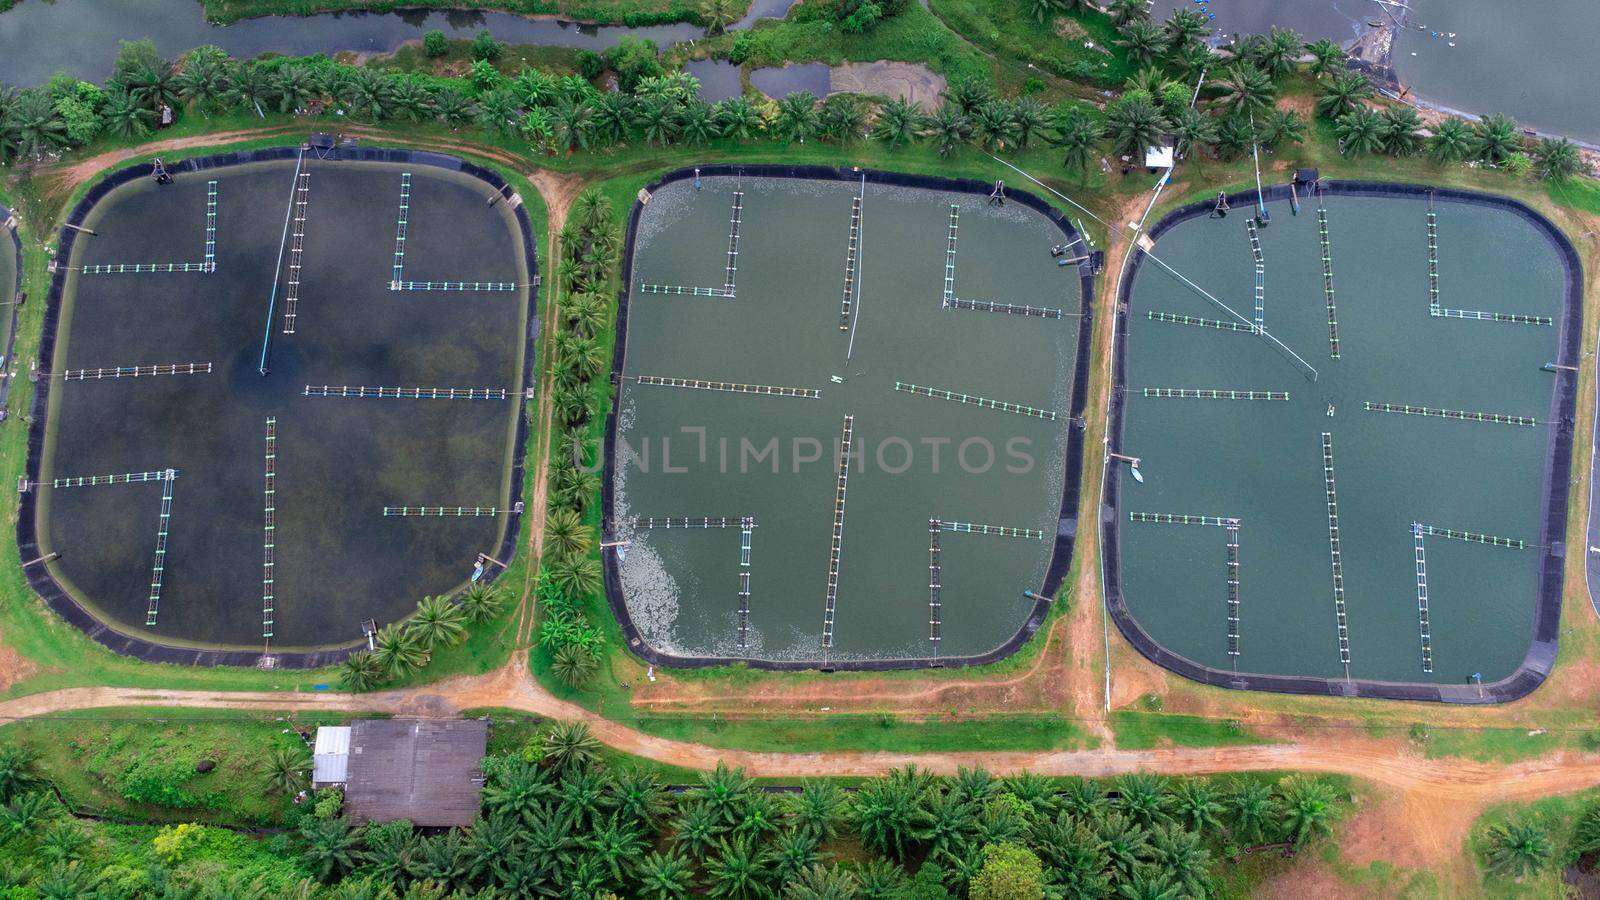 Aerial view of sewage treatment plant. Industrial wastewater treatment plant in Southern Thailand. Sewage Farm